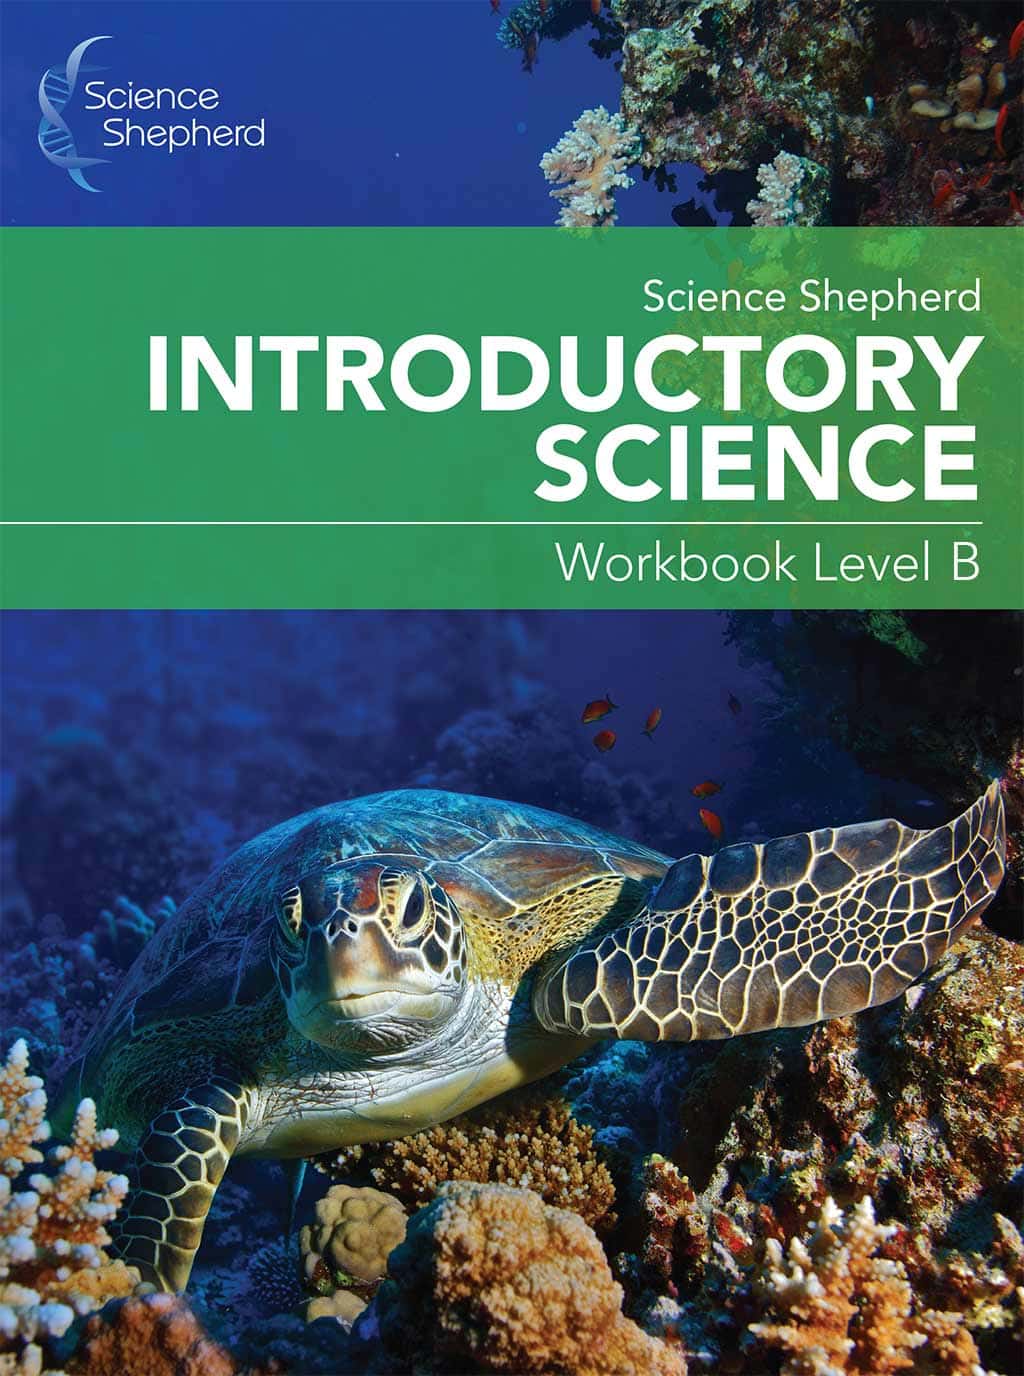 Cover for Introductory Science DVD or online homeschool Workbook Level B of a turtle underwater